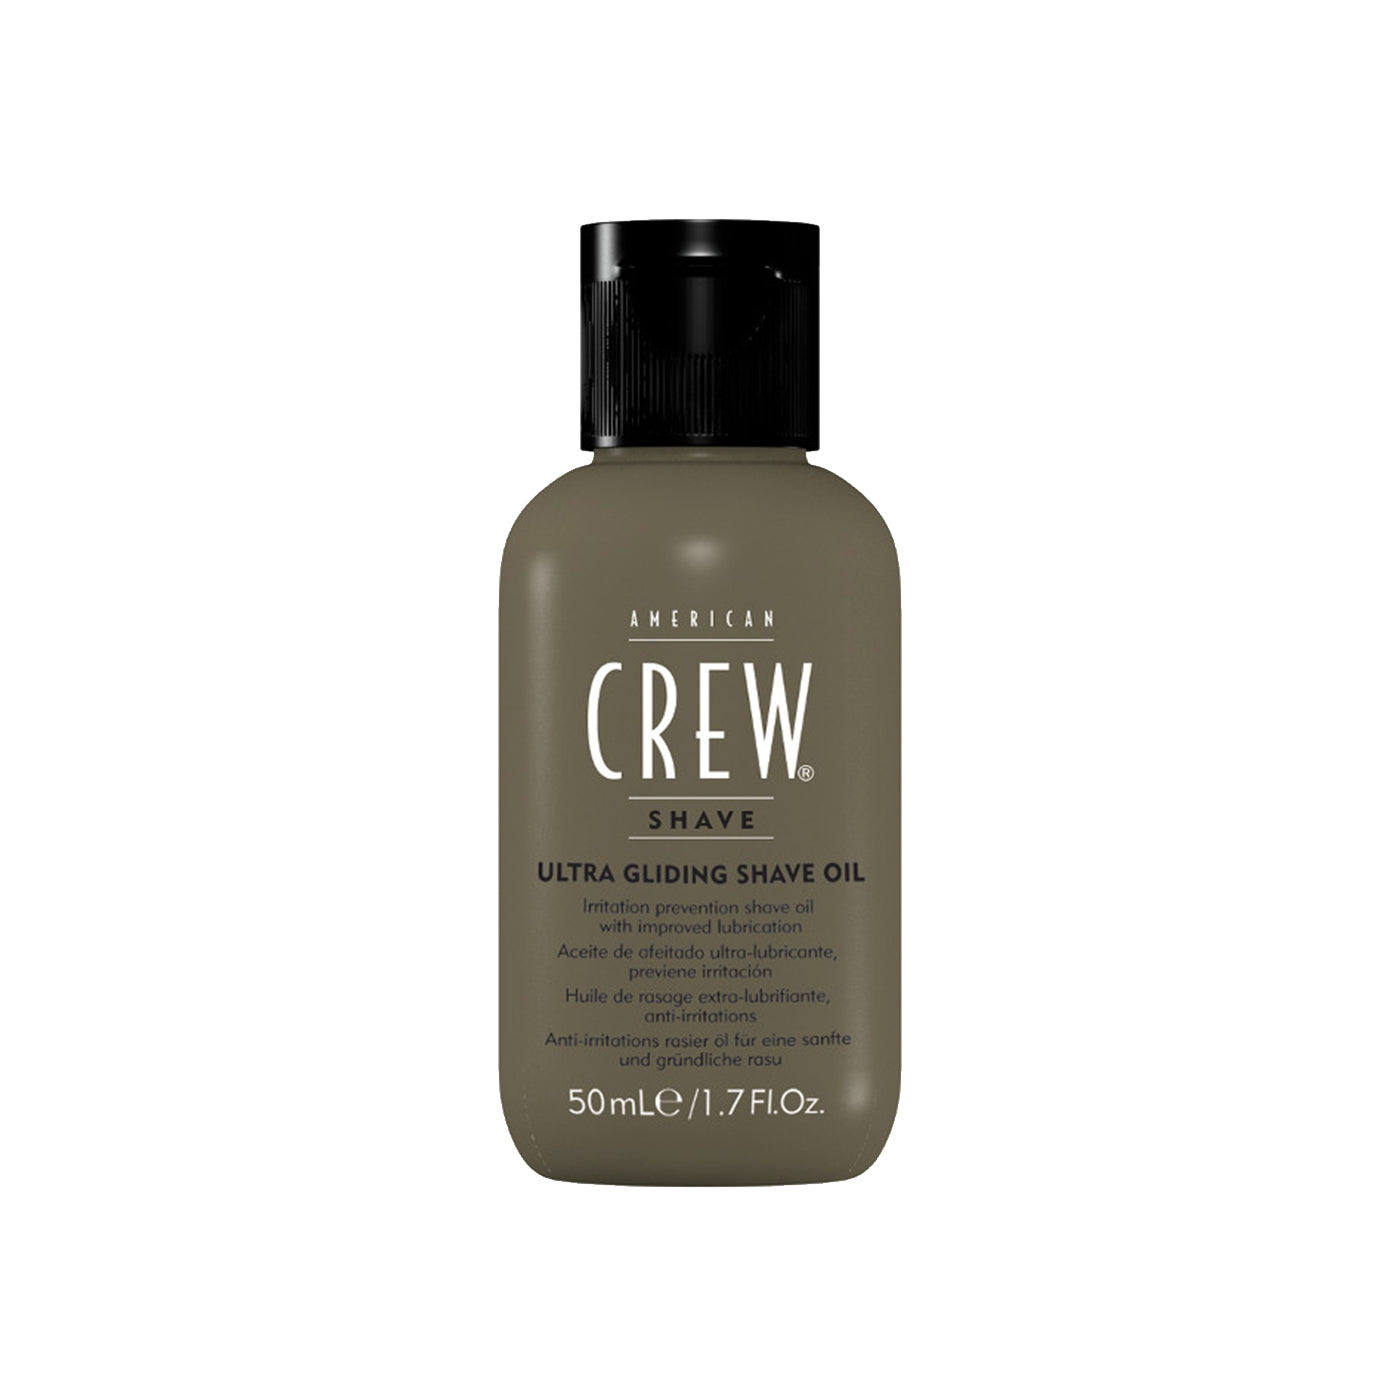 American Crew Ultra Gliding Shave Oil (50ml) - Ultimate Hair and Beauty